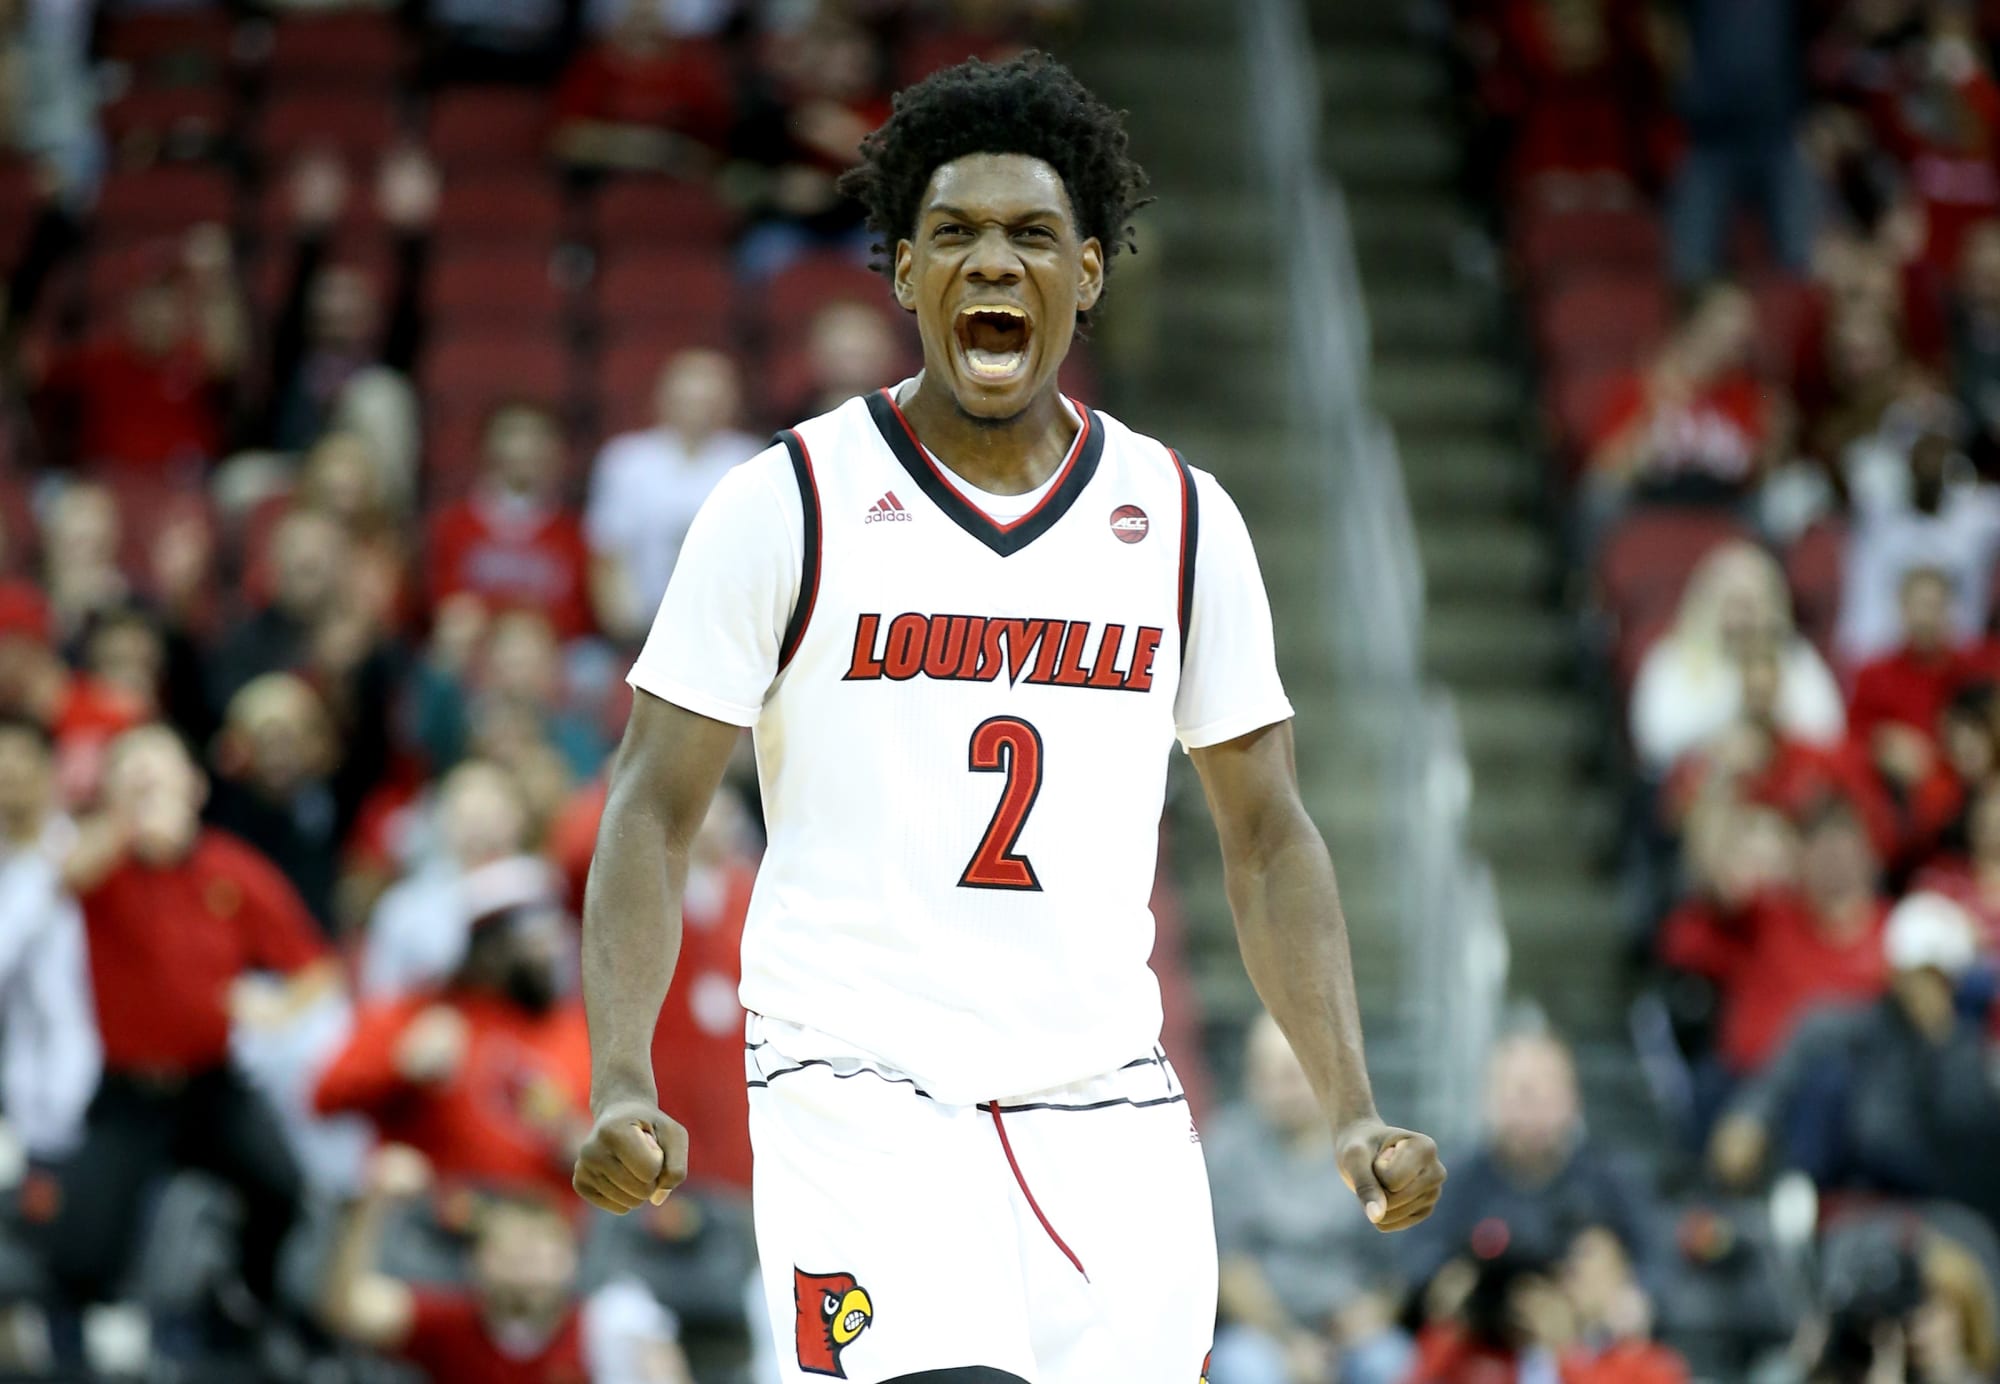 Louisville Basketball Strength and conditioning Stark Contrast Under Mack